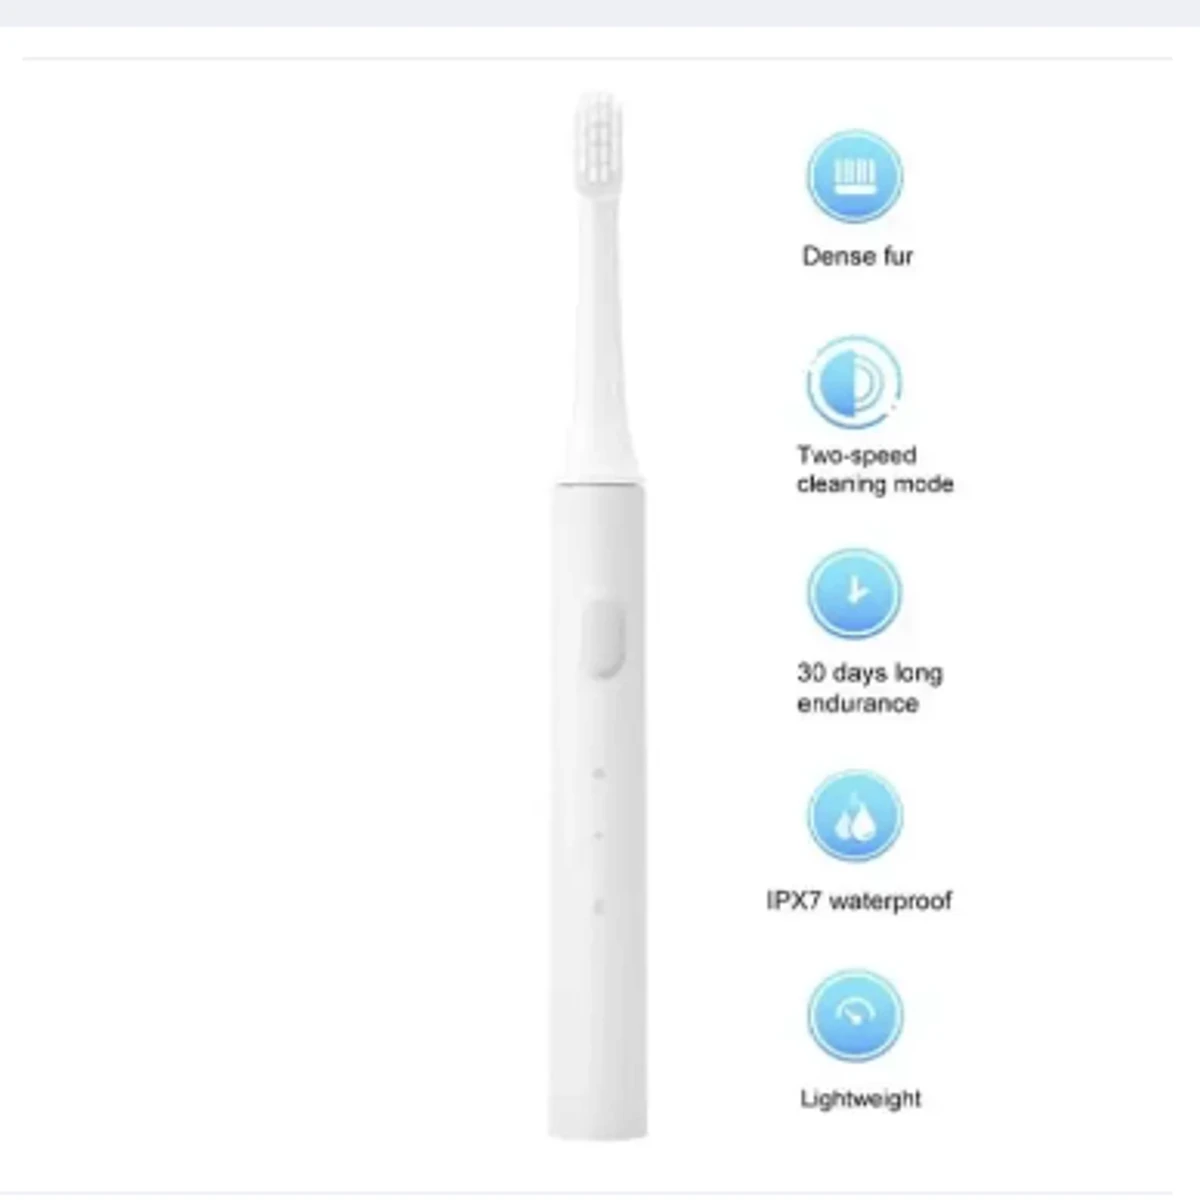 Xiaomi Mijia T100 Sonic Electric Toothbrush Smart Electric Toothbrush USB Charging IPX7 Waterproof Multiple Colors Available